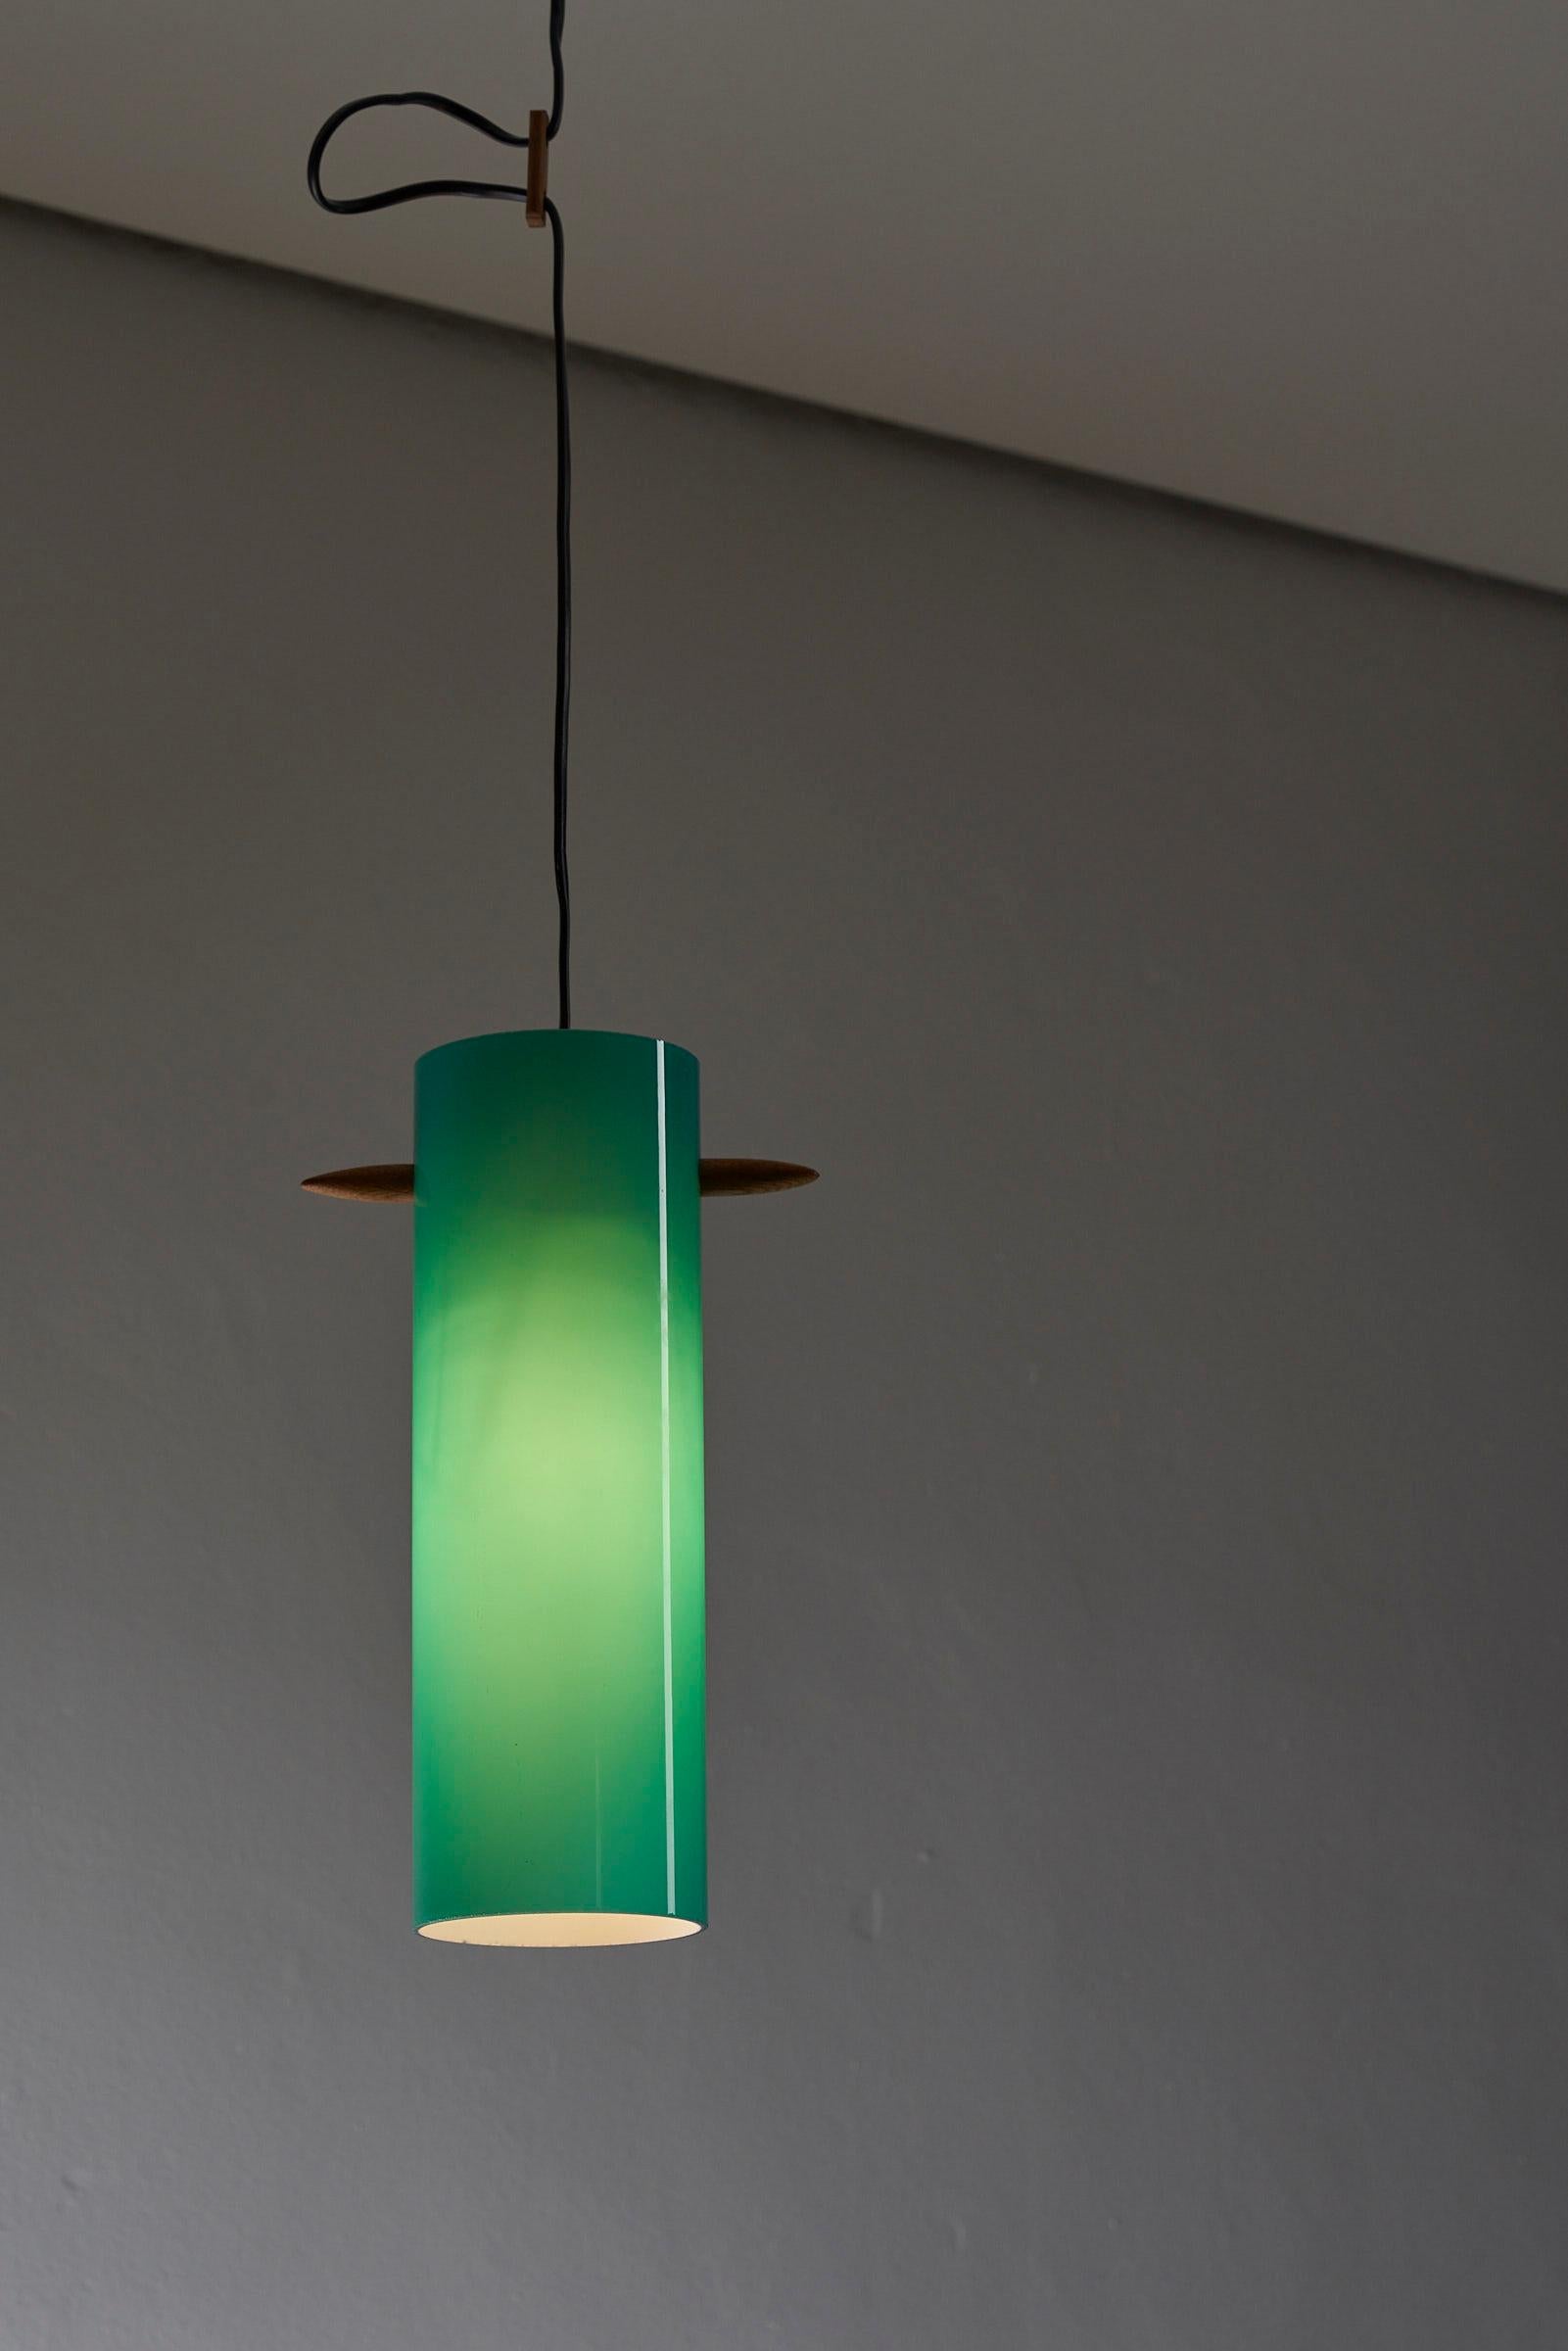 Introducing the Petrol Green Glass Cylinder pendant by Luxus, a stunning and unique lighting piece that effortlessly combines elegance and natural elements. This lamp features a captivating full glass cylinder in a beautiful petrol green color,